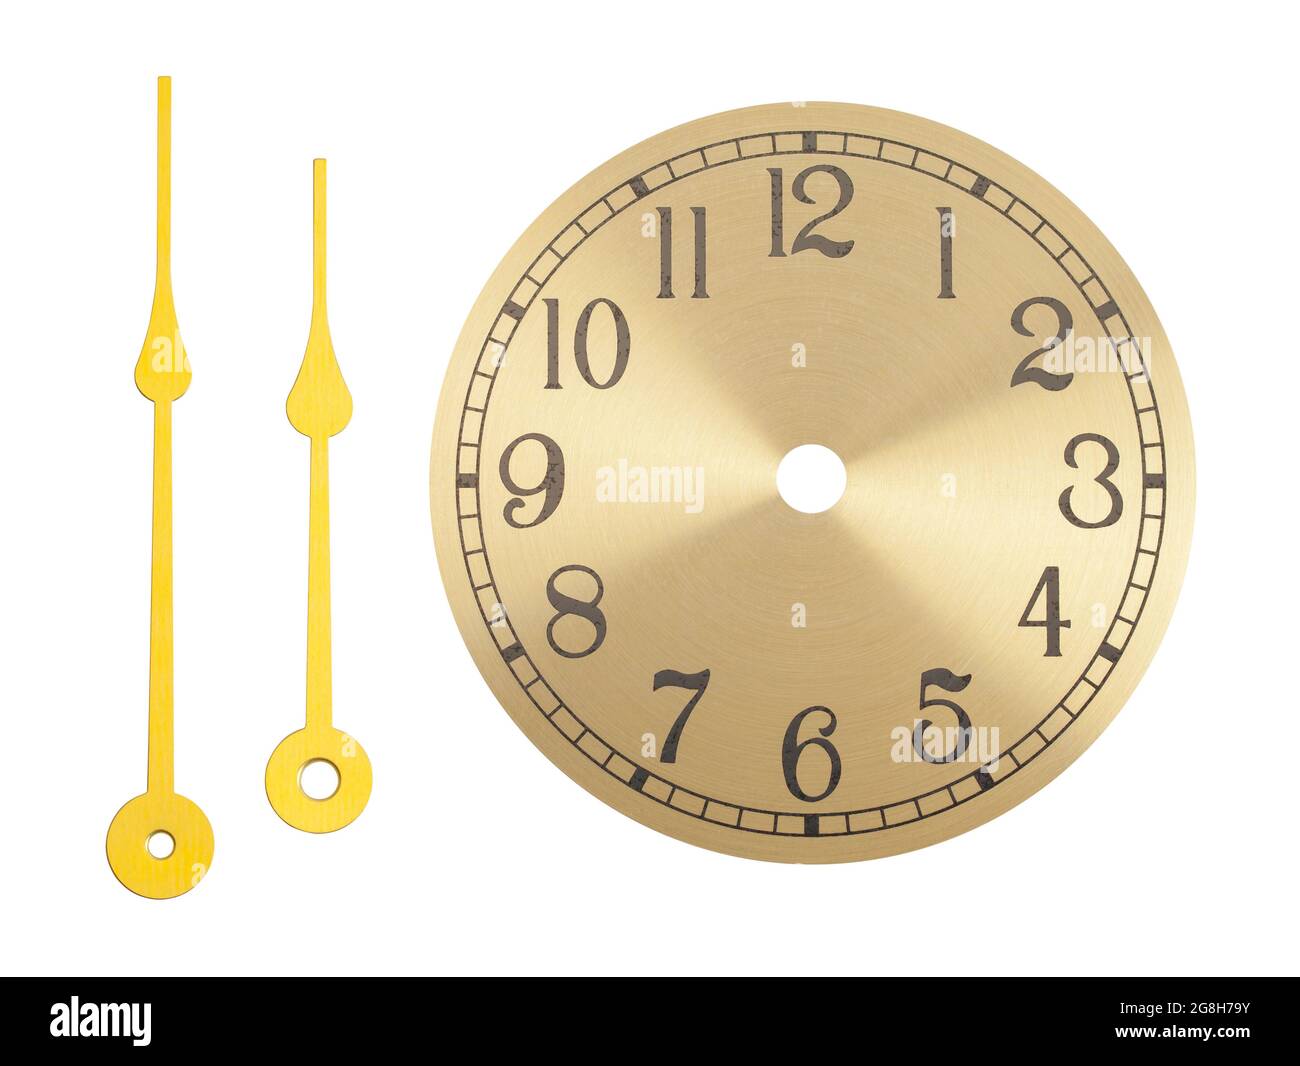 Clock Face with Hands Cut Out on White. Stock Photo